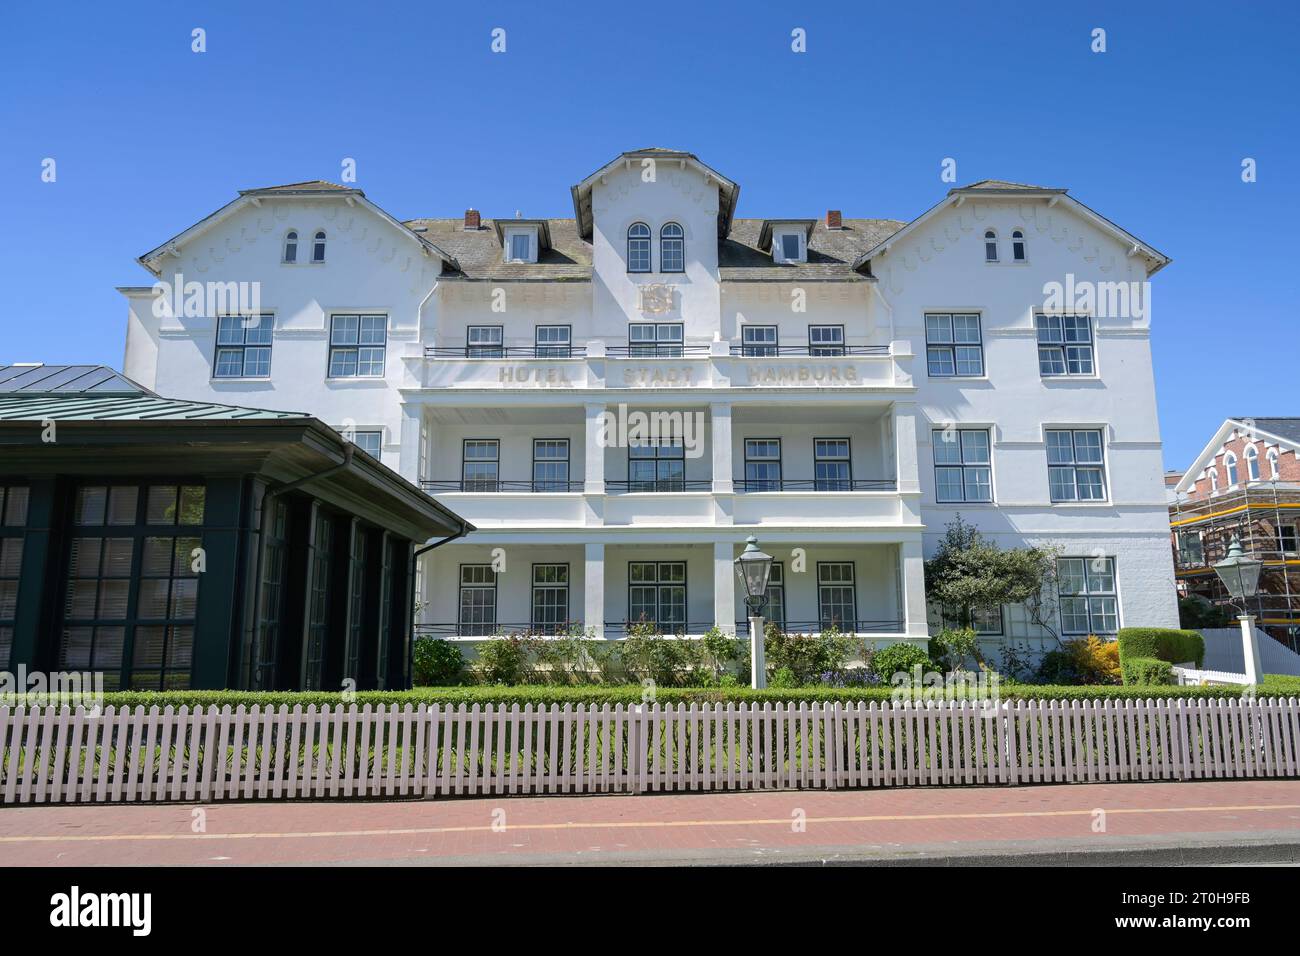 Alamy and Hamburg photography sylt stock images hi-res -